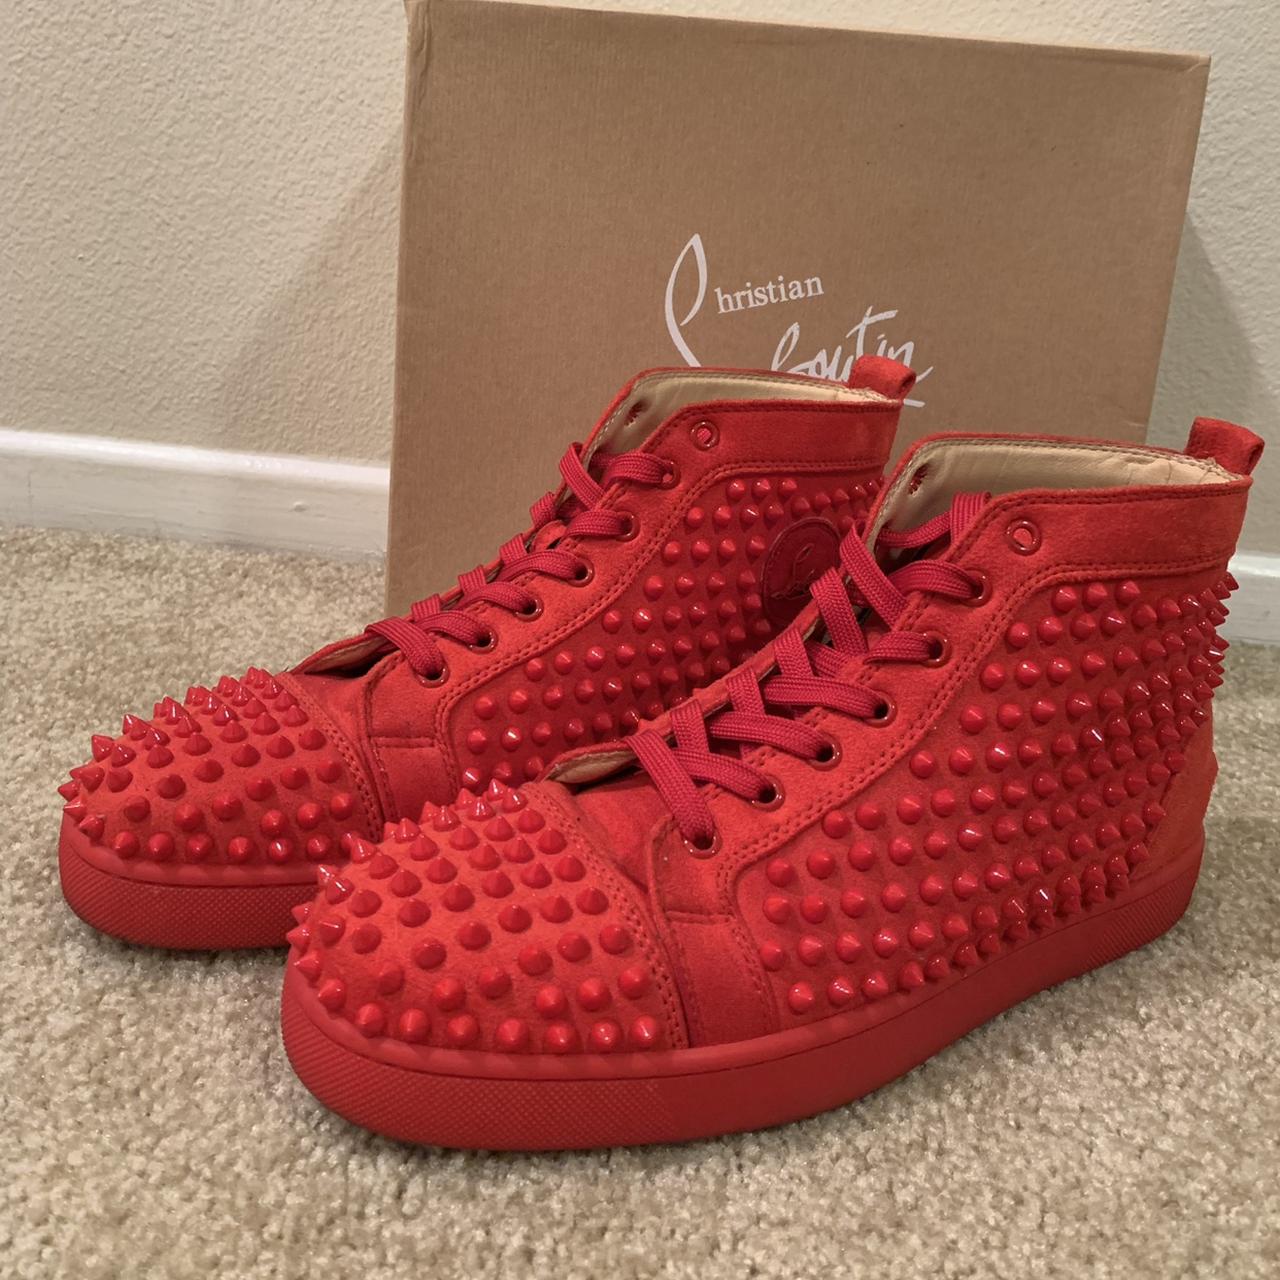 Christian Louboutin Mens Shoes Red Bottoms